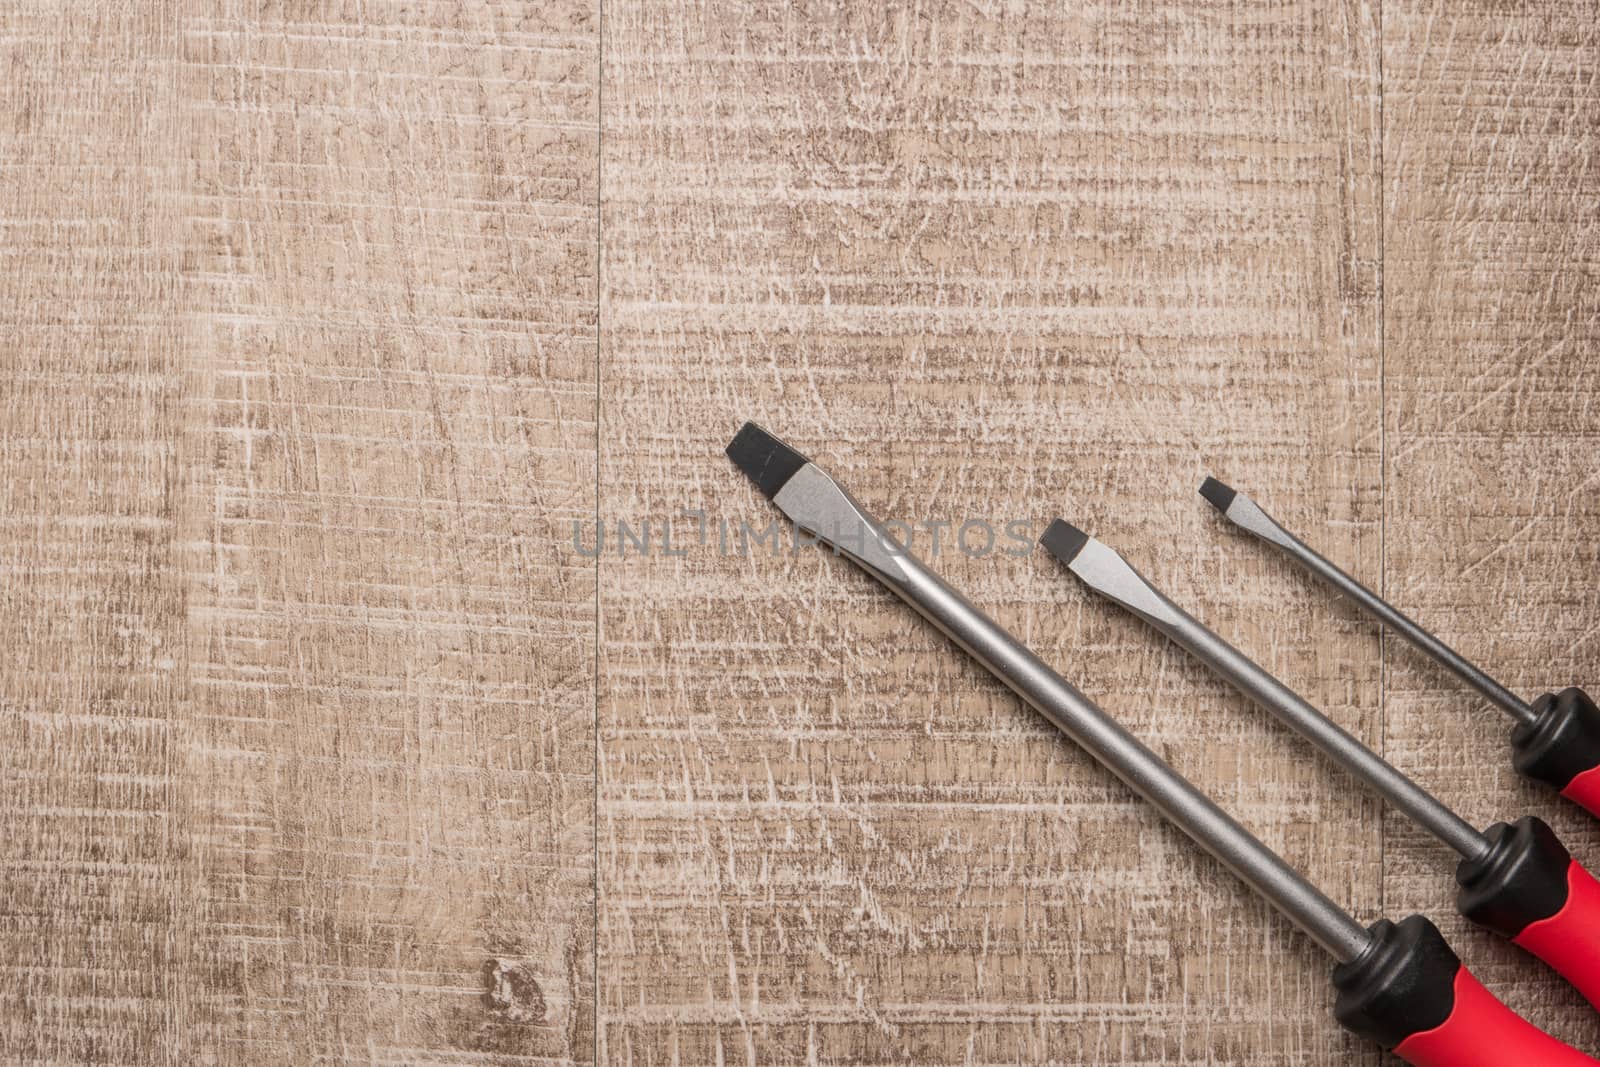 Set of screwdrivers. Tools over a wood panel. Top view with copy by AnaMarques